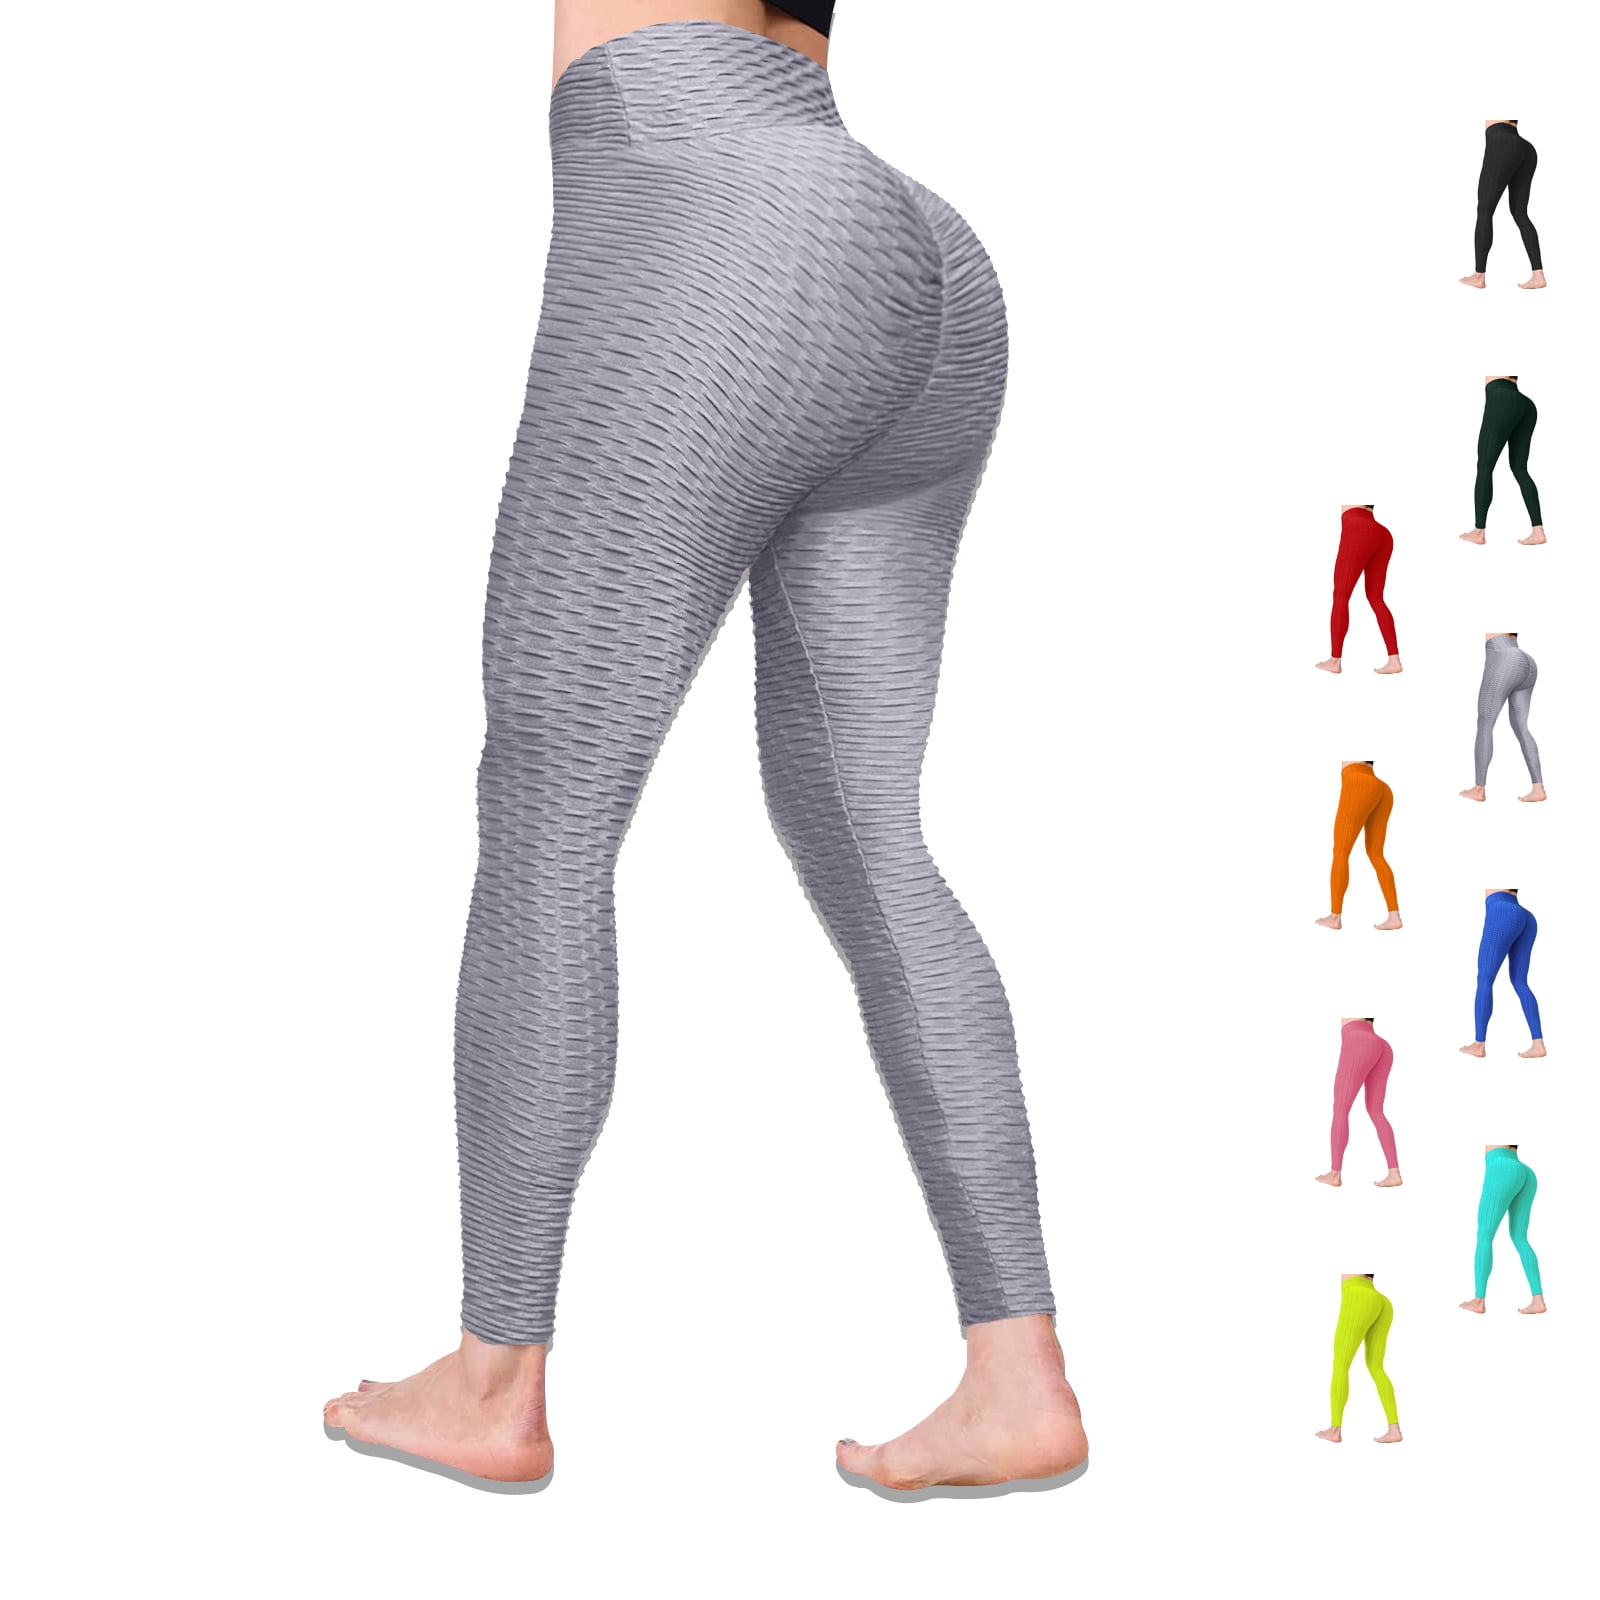 High Waist Tiktok Yoga Pants, Women Butt Lifting Leggings, Tummy Control  Ruched Slimming Booty Workout Tights, Pink, S Size 